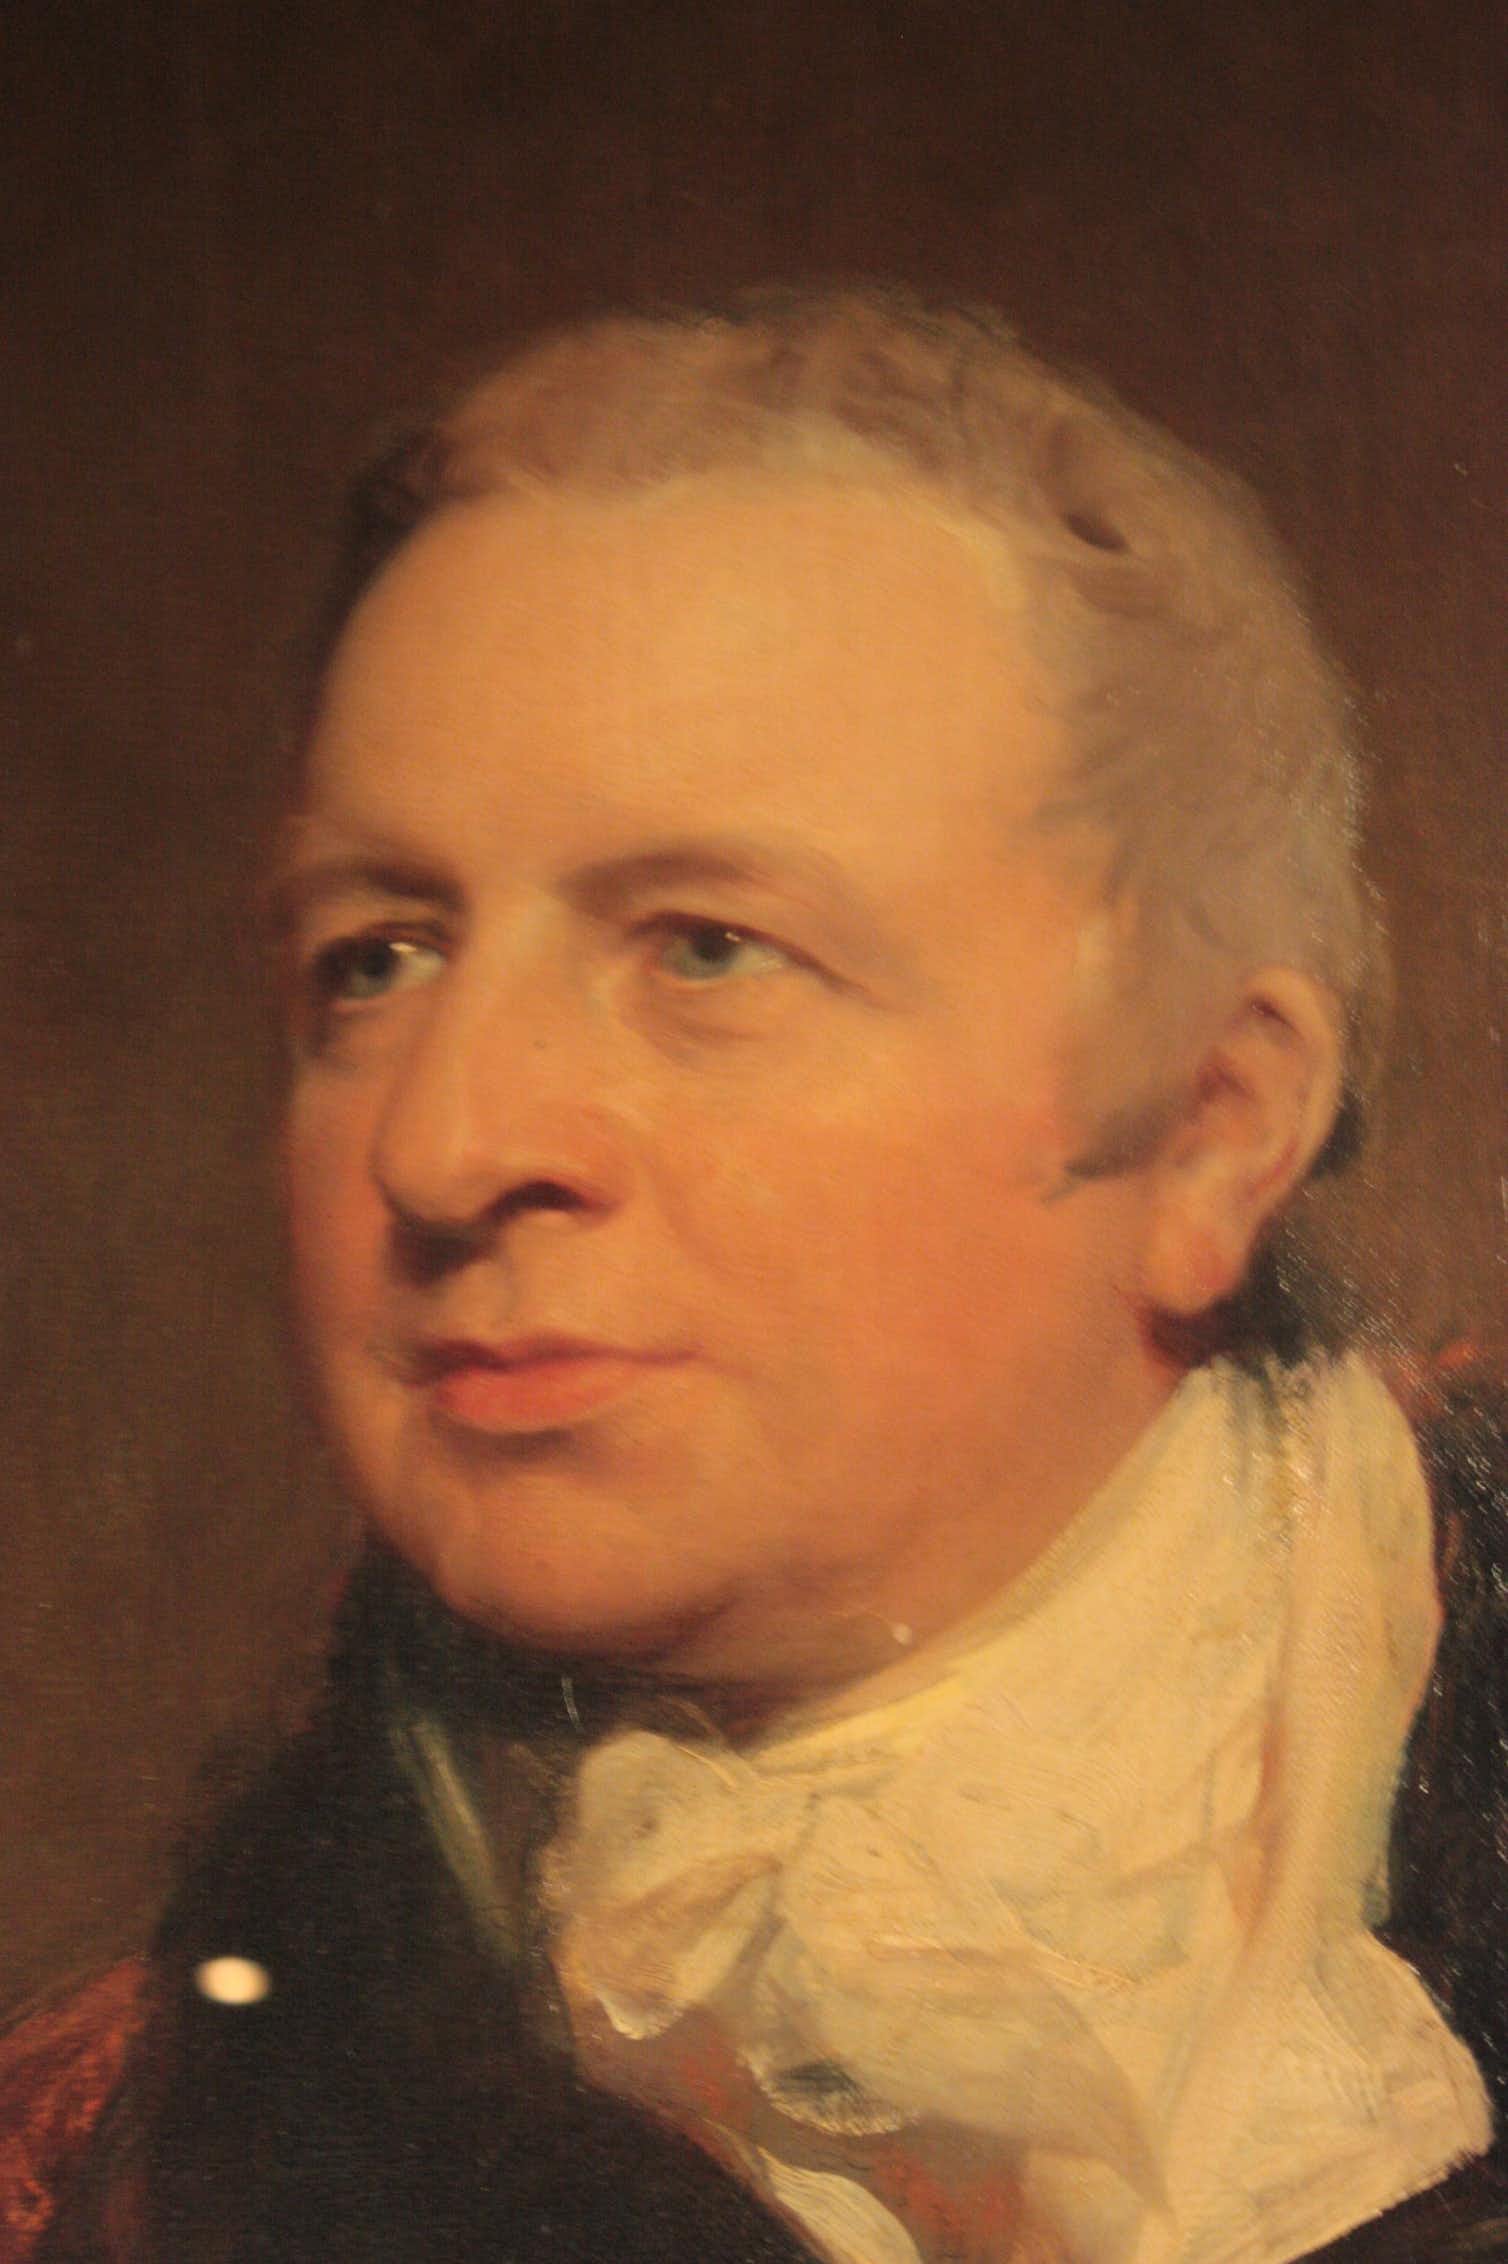 An old painting of a man with blue eyes and short gray hair, wearing a ruffled collar shirt